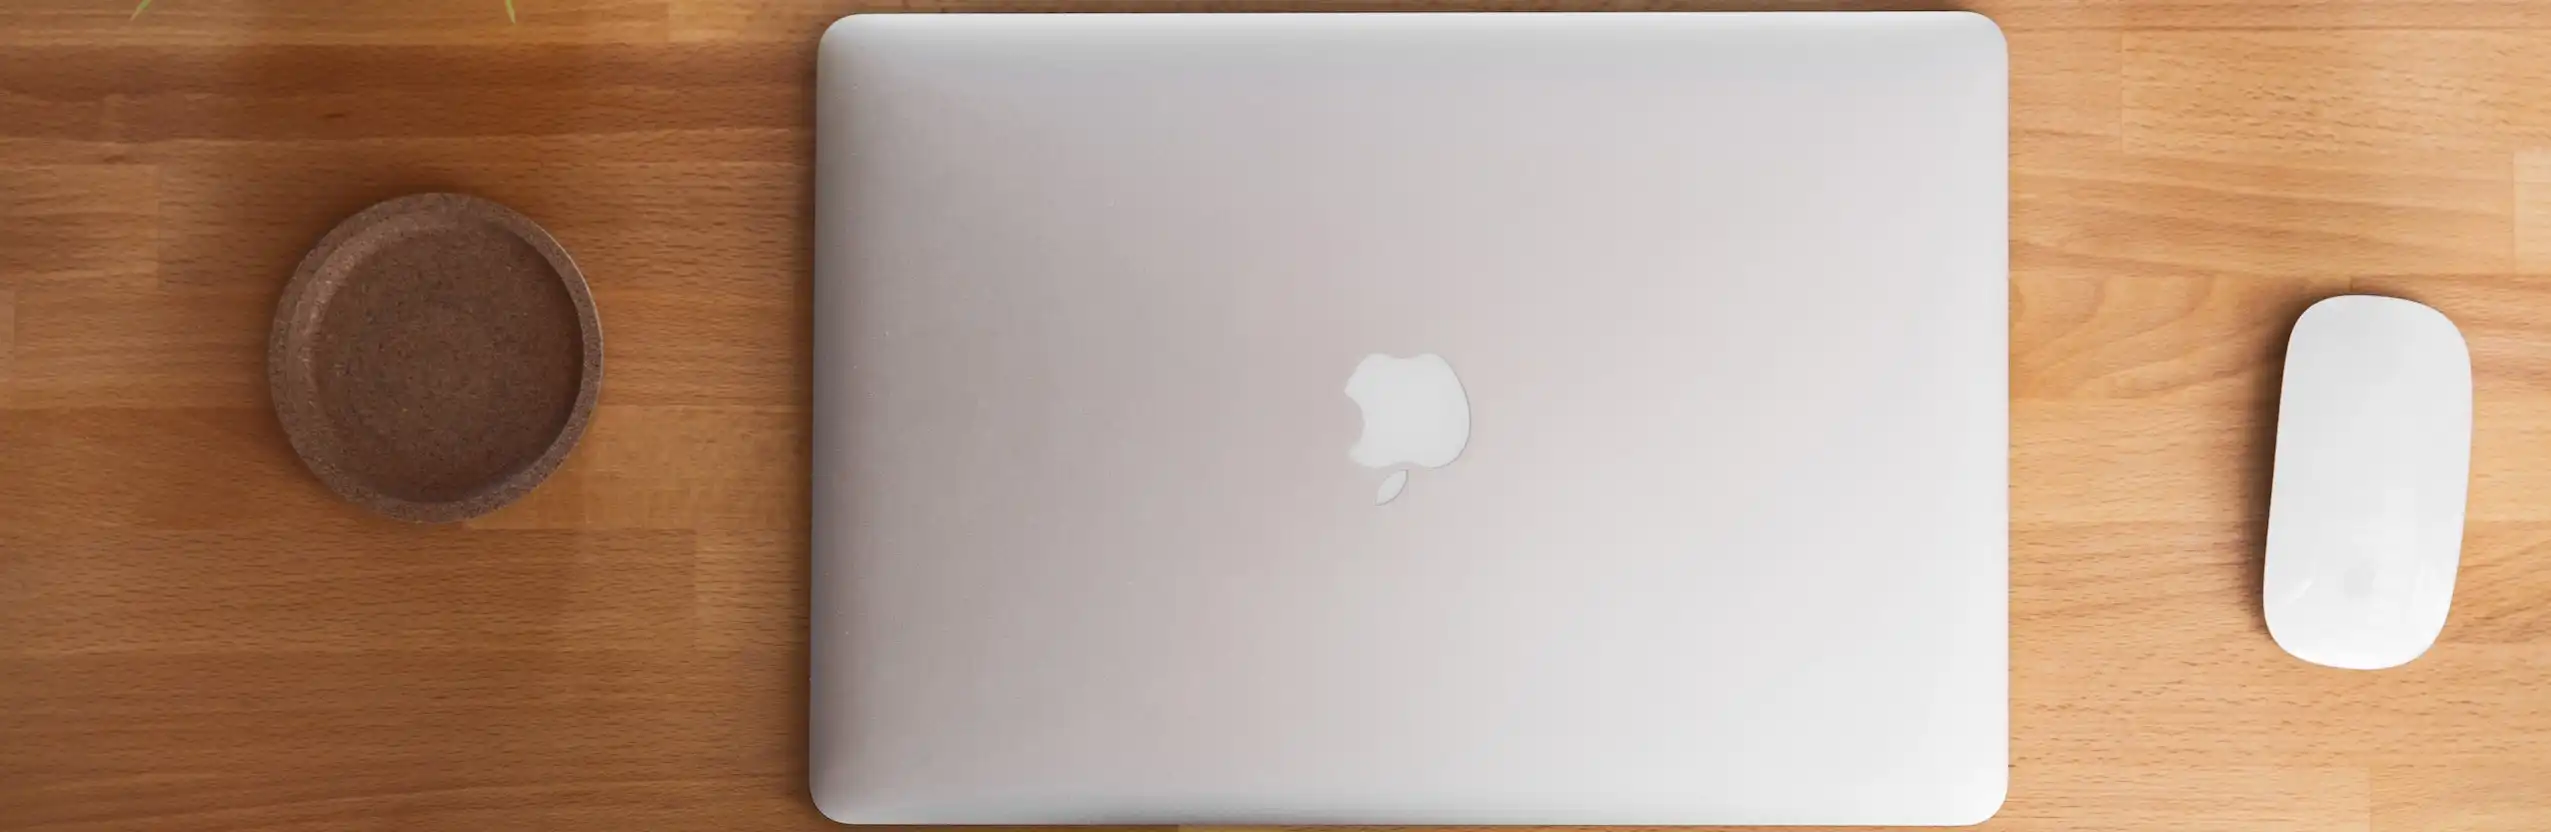 Photograph of Macbook With Magic Mouse and Coaster